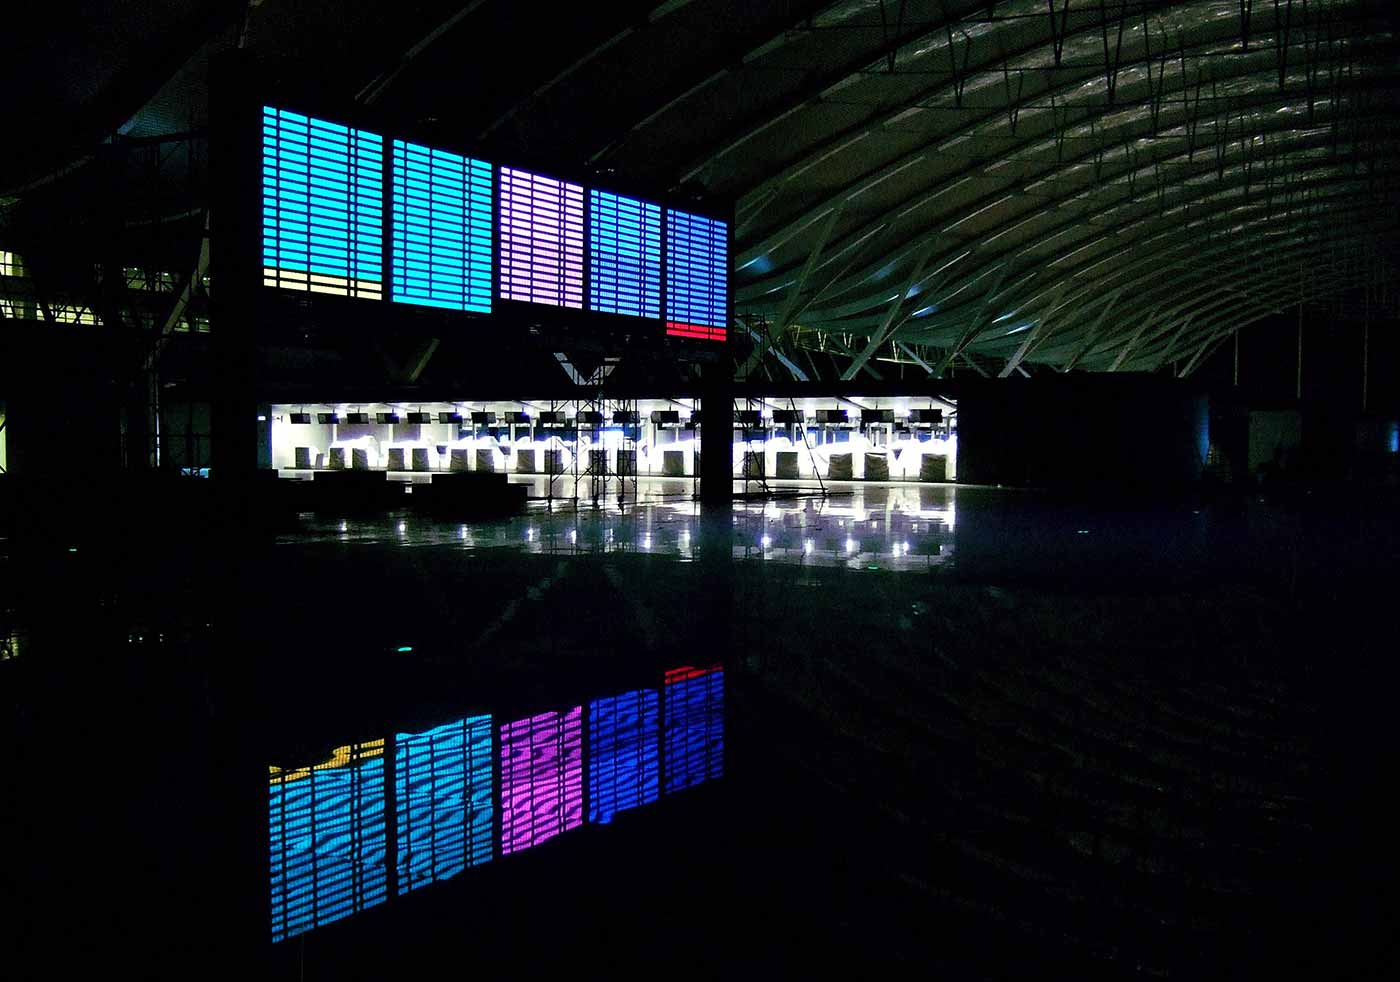 Departure board at night